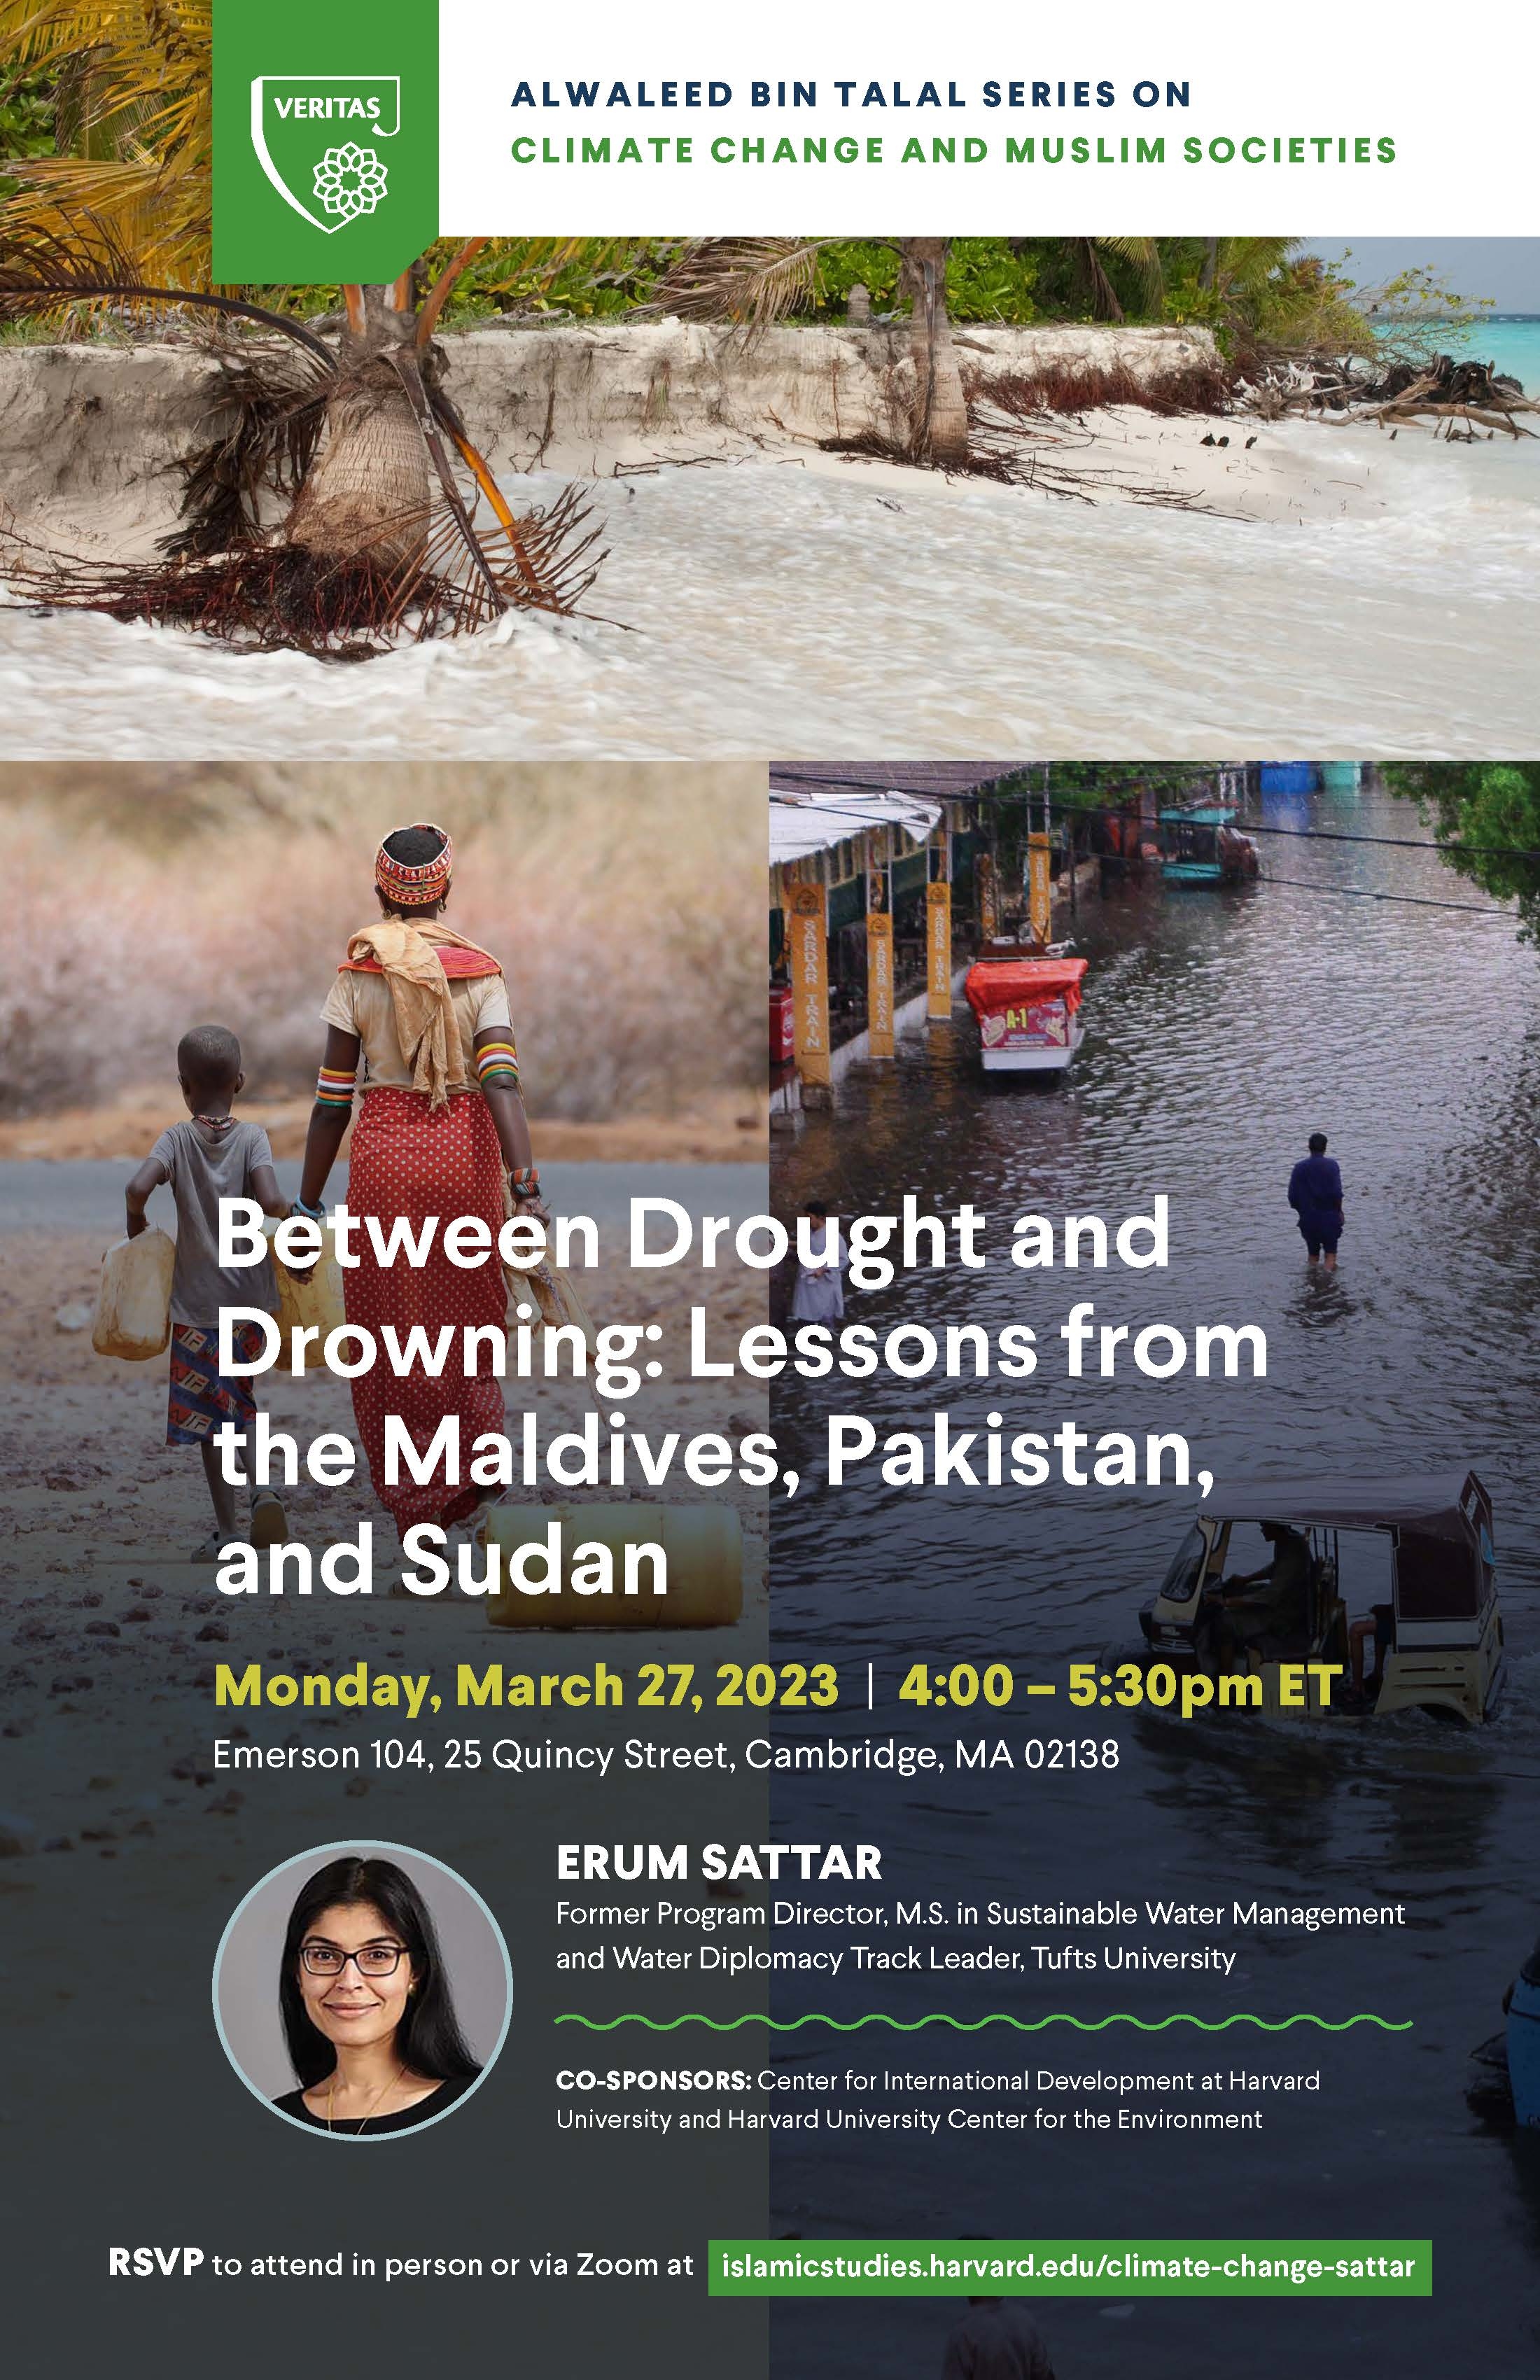 Between Drought and Drowning: Lessons from the Maldives, Pakistan, and Sudan